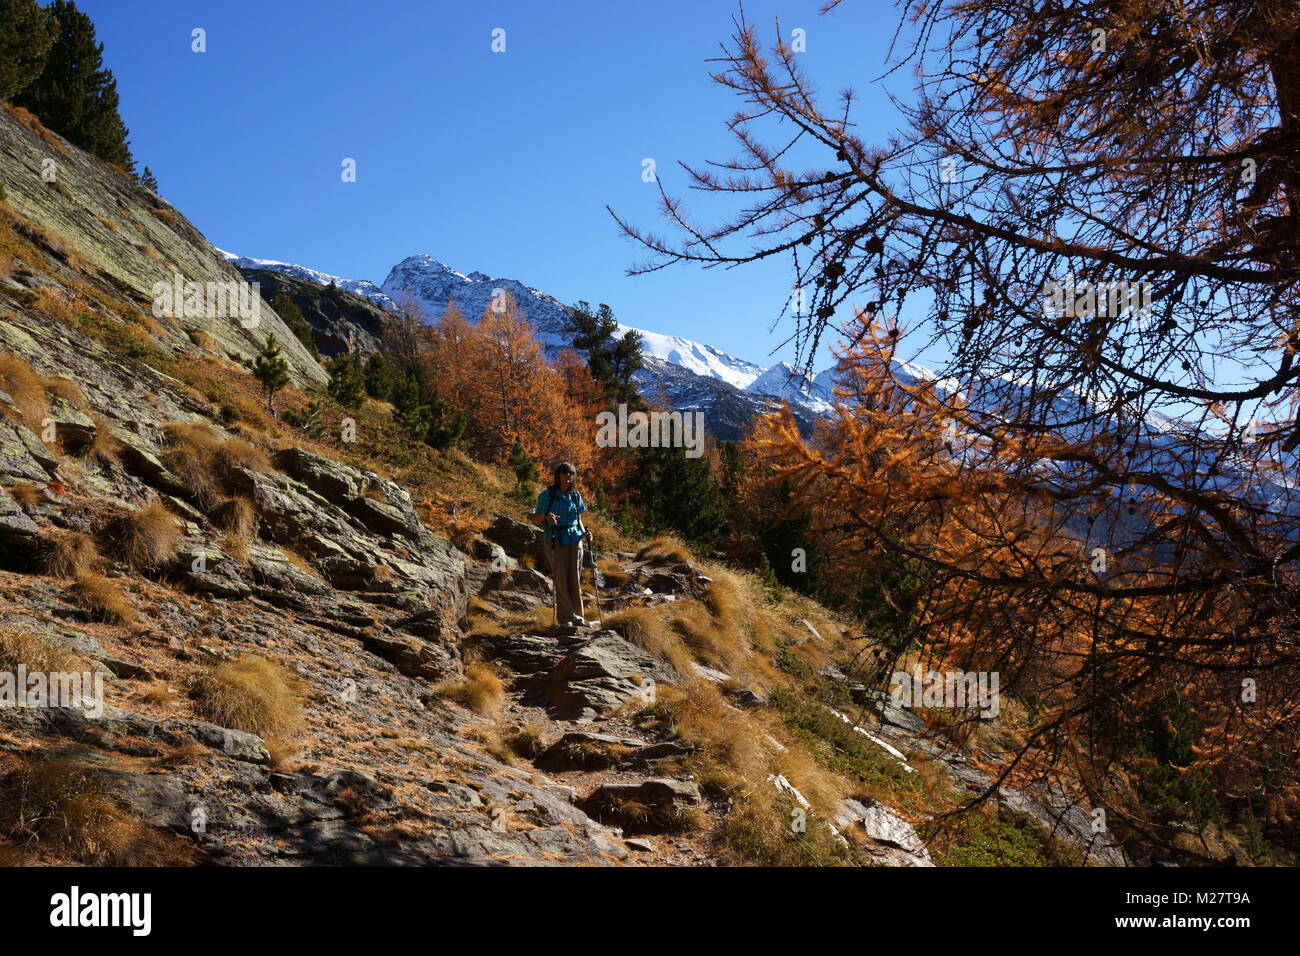 Gspon to Saas Grund 'Höhenweg' hiking trail, larch trees and snow capped mountains, fall, Valais, Switzerland Stock Photo